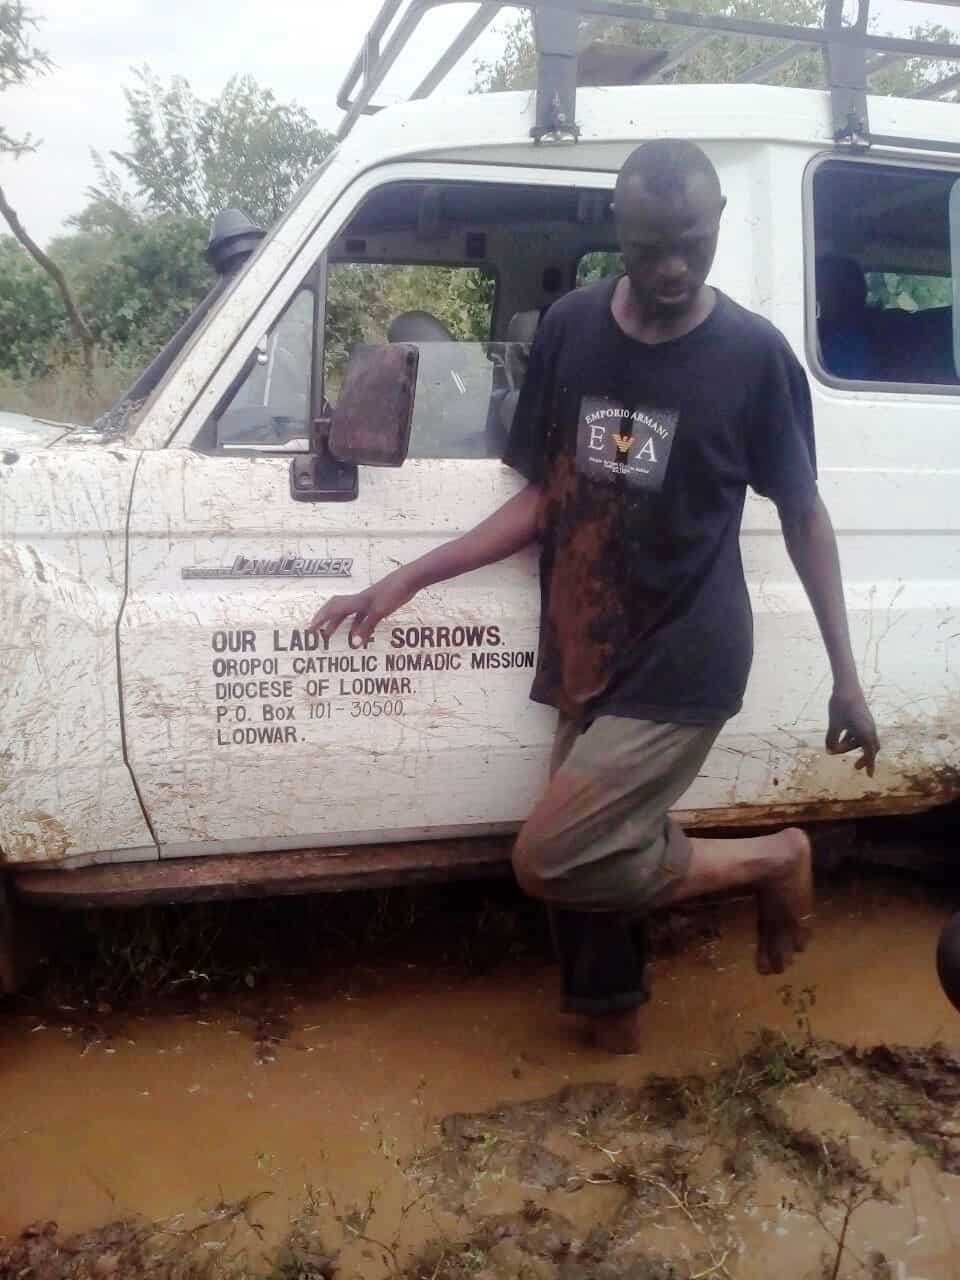 A man stands next to a truck that is stopped in muddy water